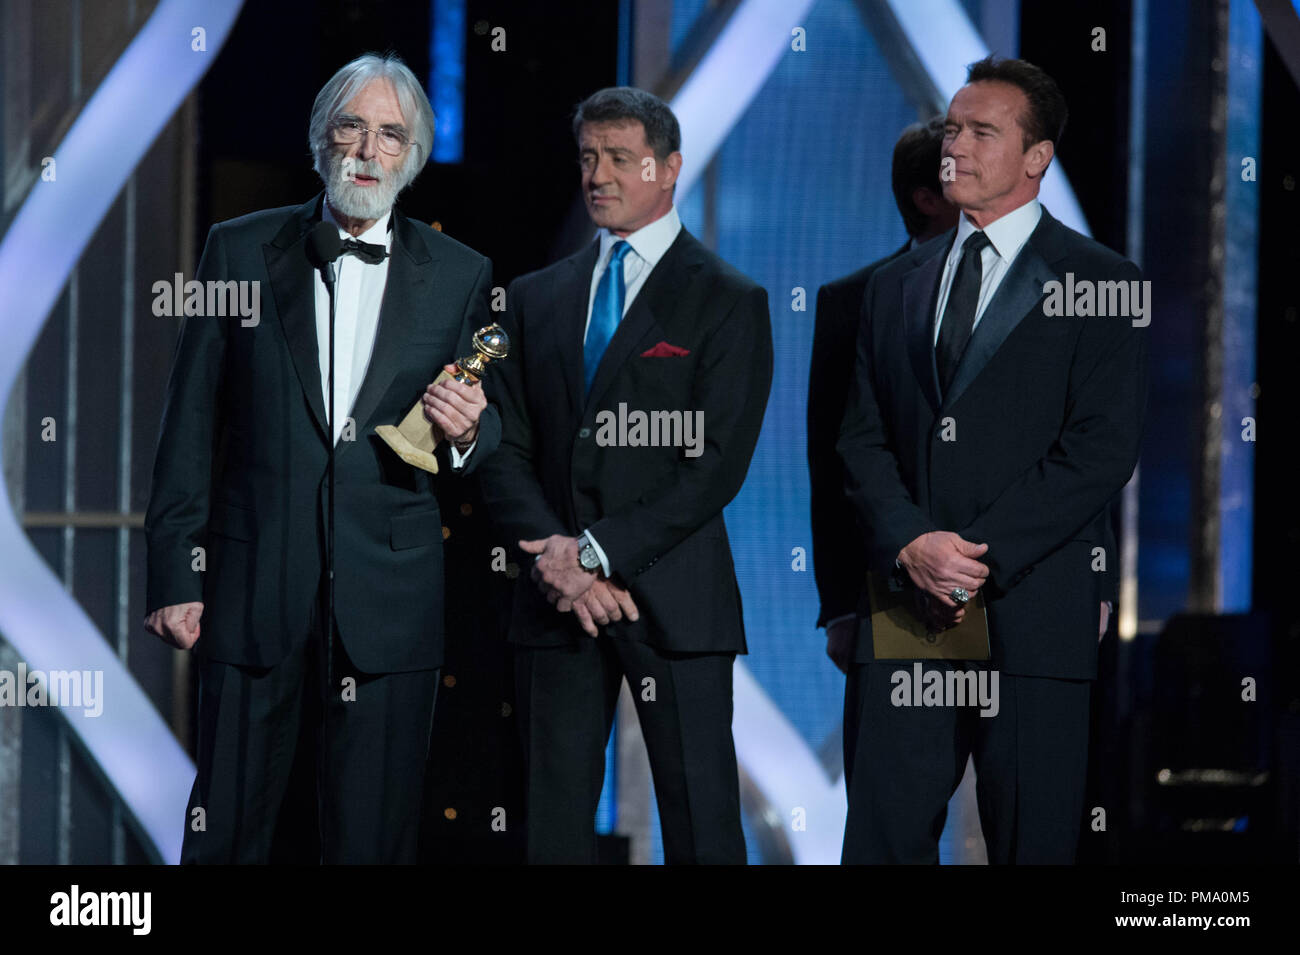 Accepting the Golden Globe for BEST FOREIGN LANGUAGE FILM for “AMOUR” (AUSTRIA) is director Michael Haneke at the 70th Annual Golden Globe Awards at the Beverly Hilton in Beverly Hills, CA on Sunday, January 13, 2013. Stock Photo